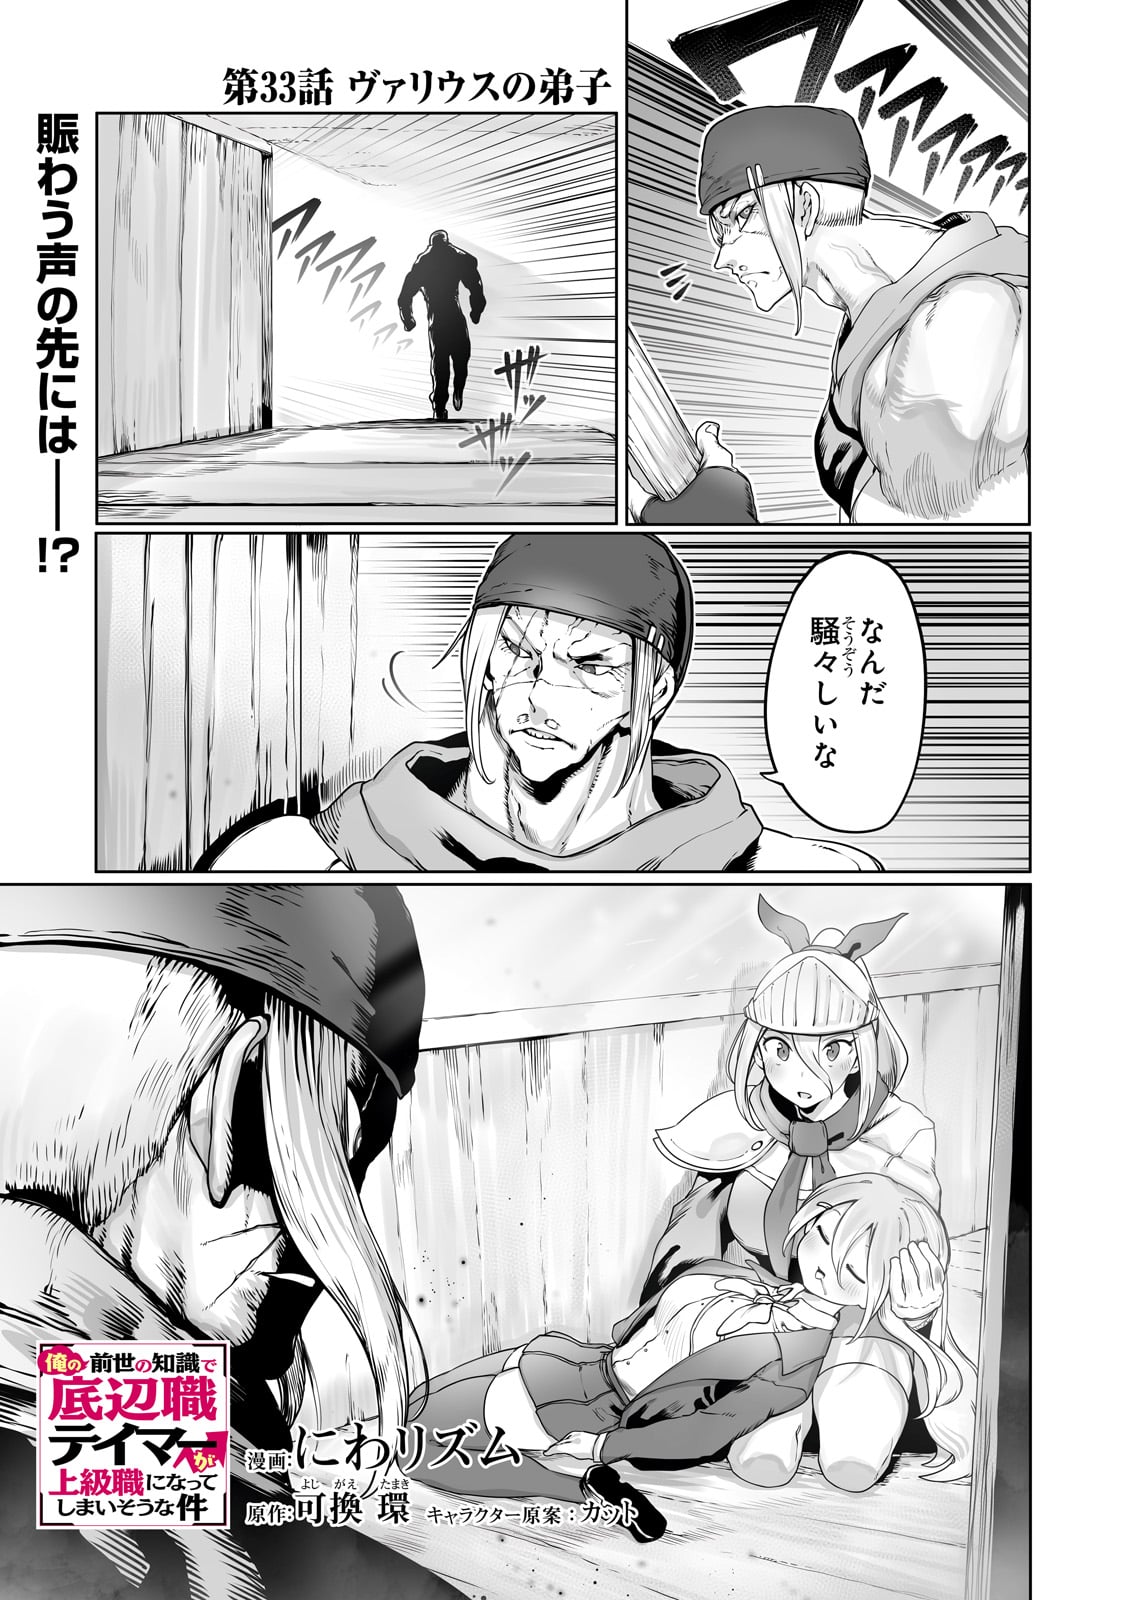 The Useless Tamer Will Turn Into the Top Unconsciously by My Previous Life Knowledge - Chapter 33 - Page 1